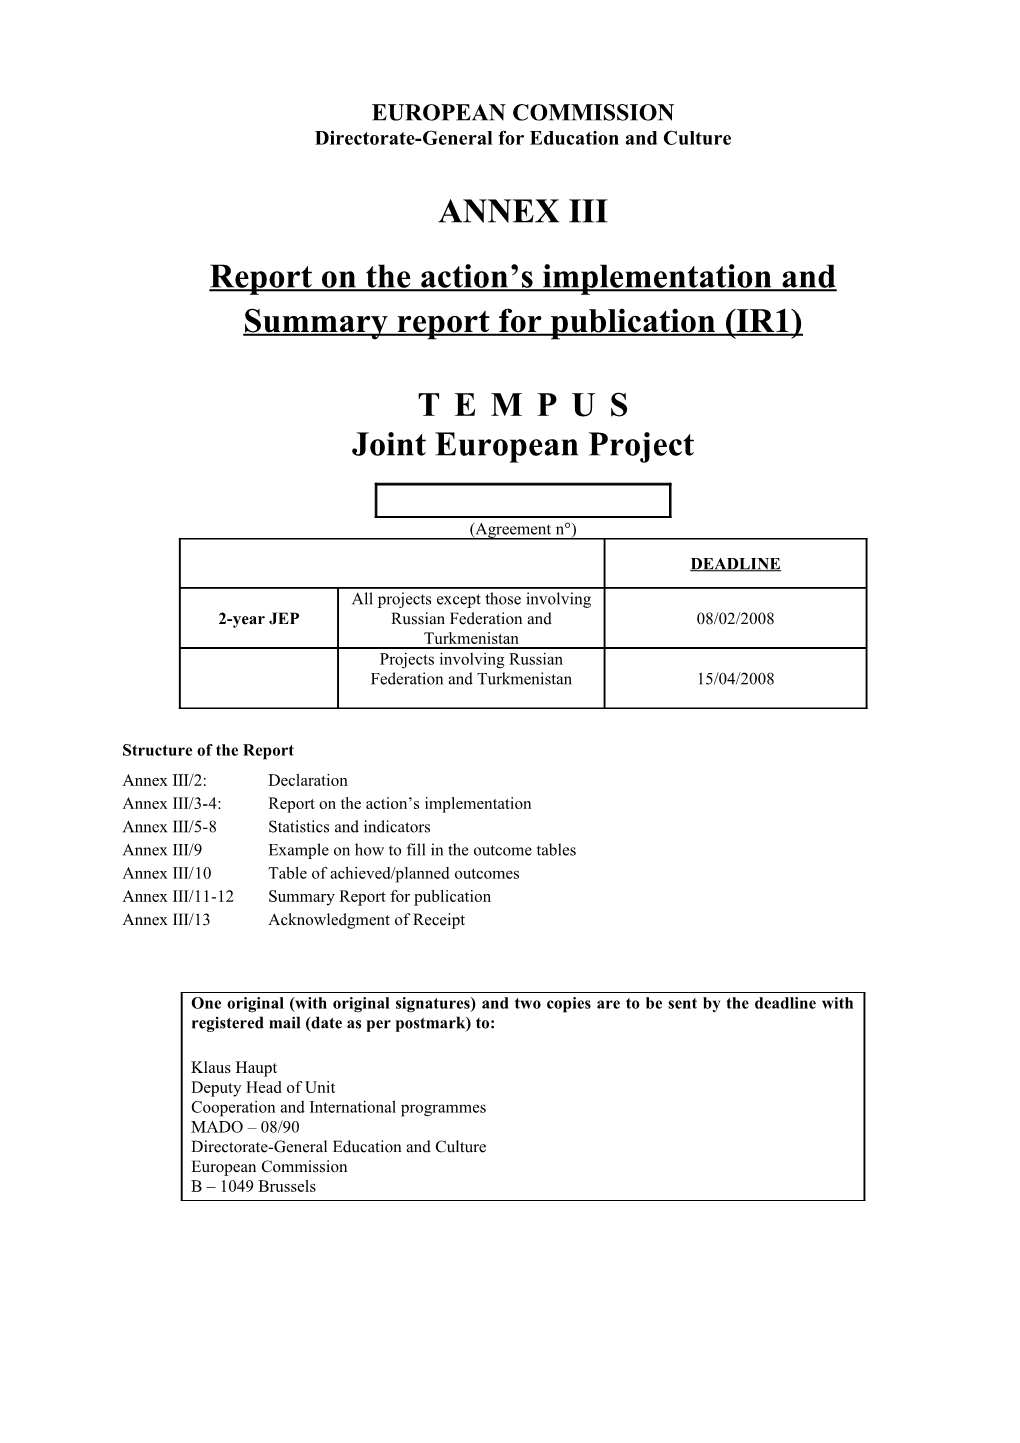 First Implementation Report Annex III/2